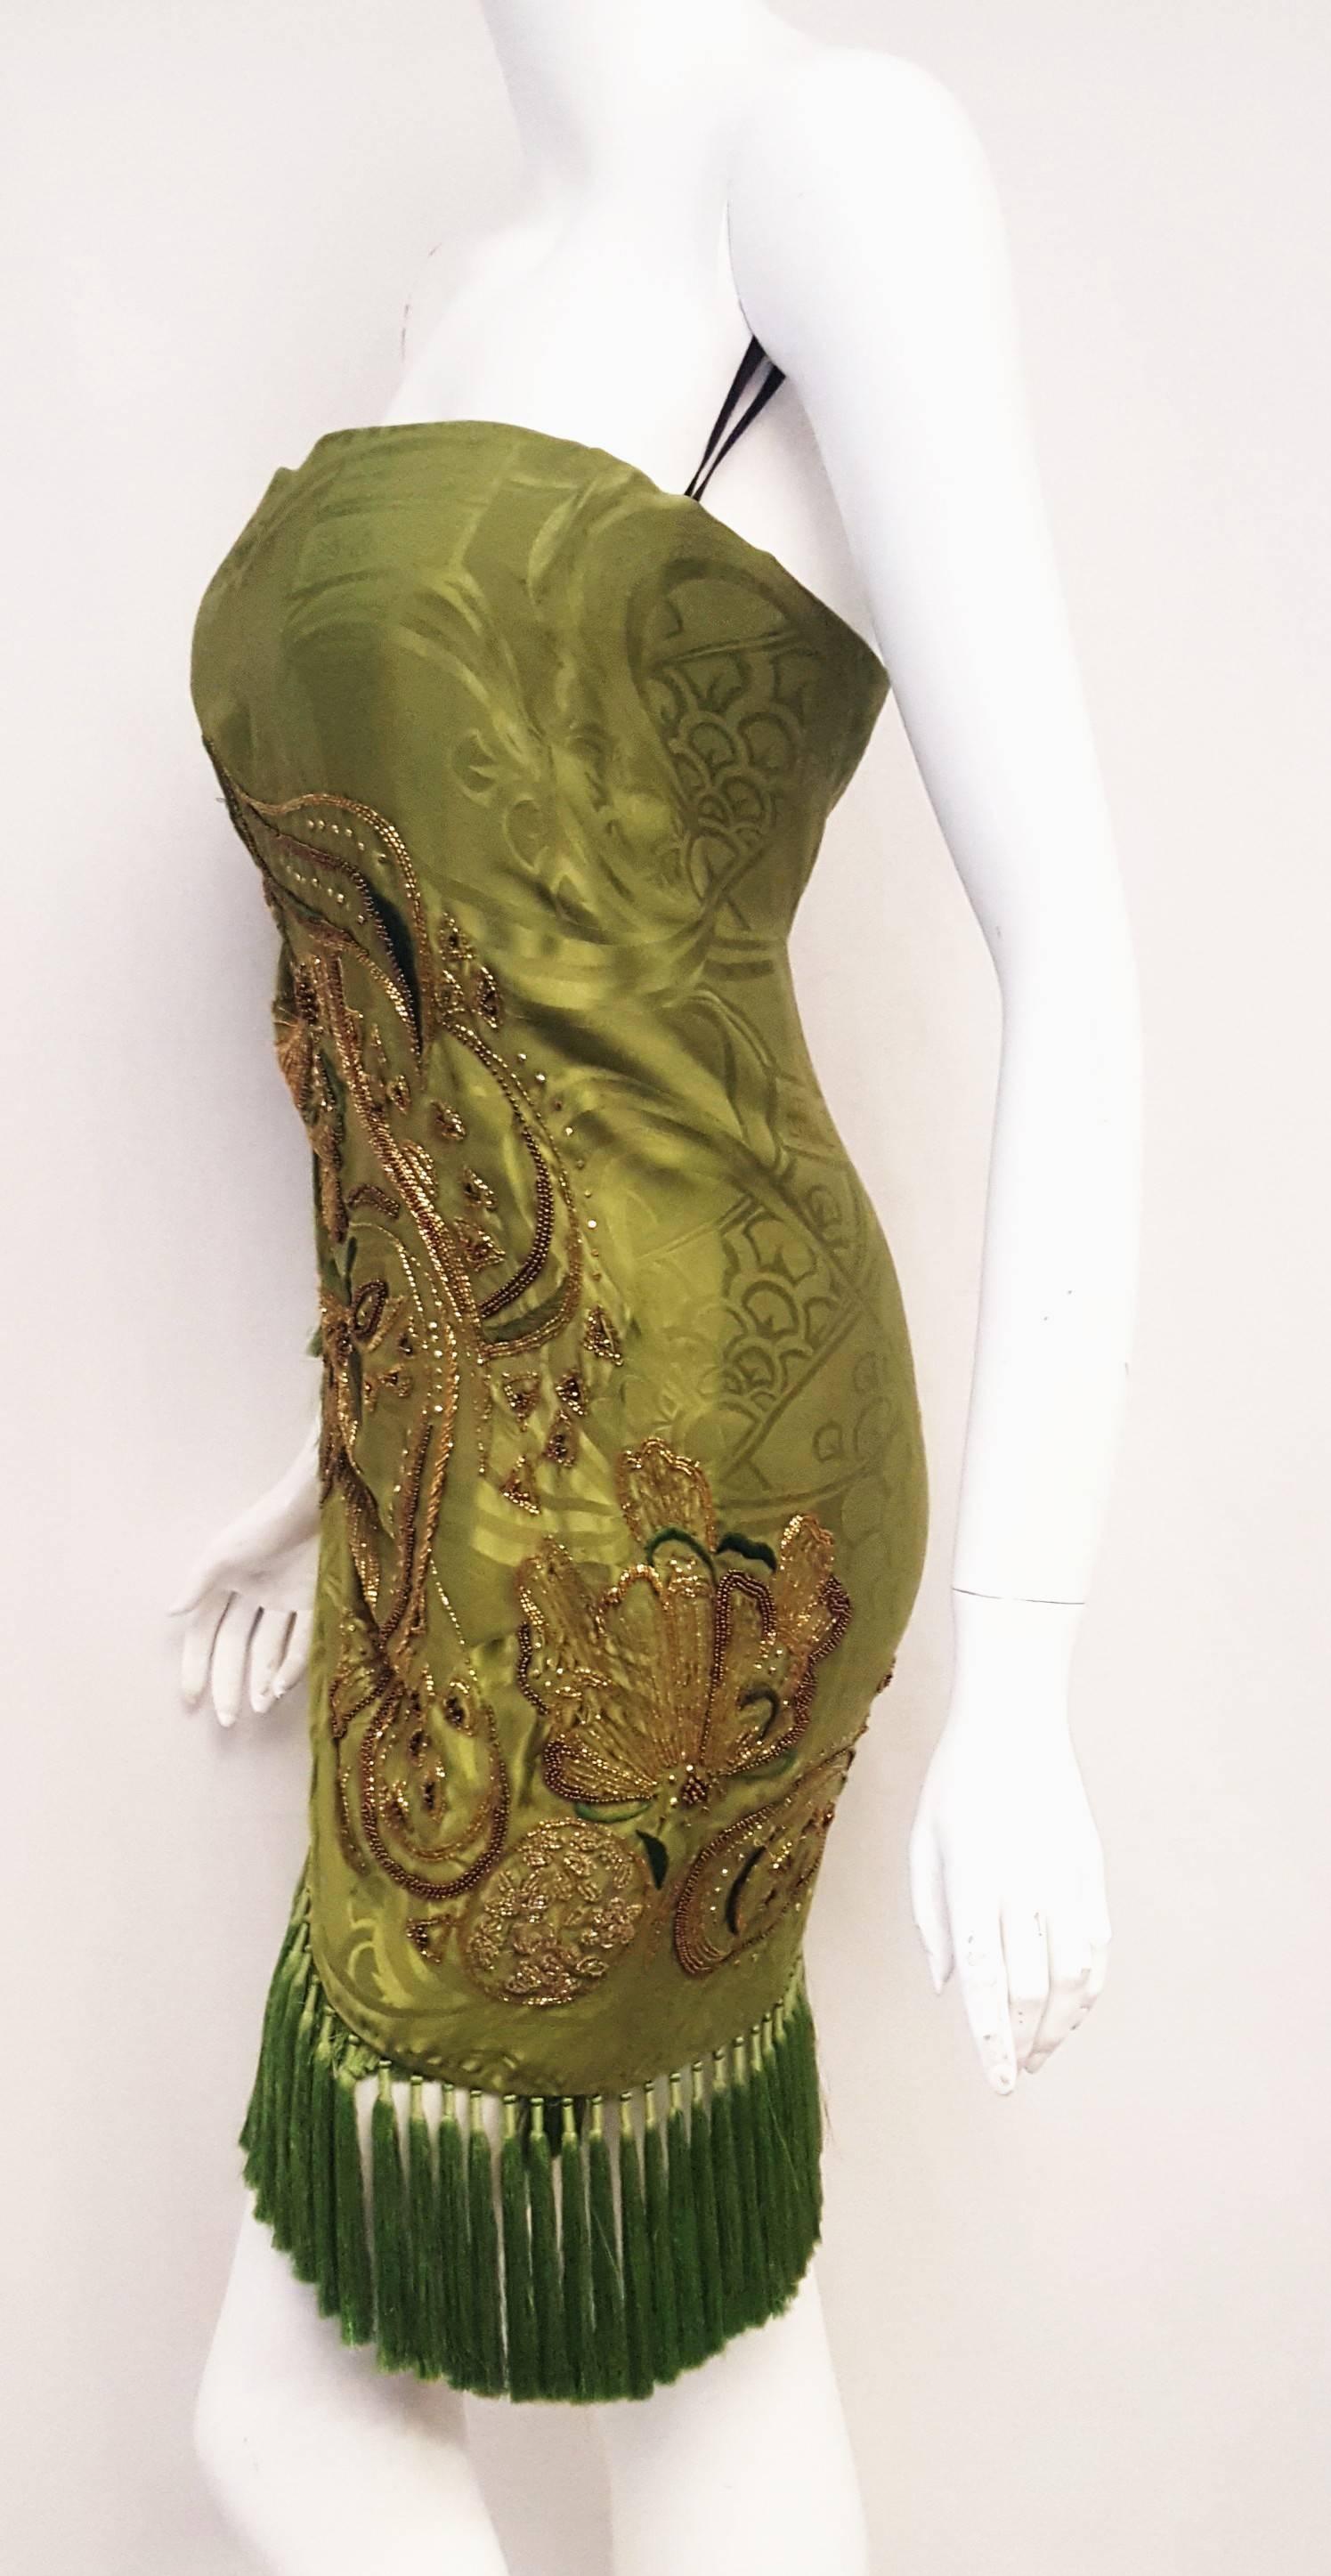 Steal the limelight in Emilio Pucci's strapless green kimono silk mini dress with beautiful beading. Balance this style with bohemian fringing on the silk strapless mini dress!  Emilio Pucci dress has a wrap-over front, gold and bronze sequin and